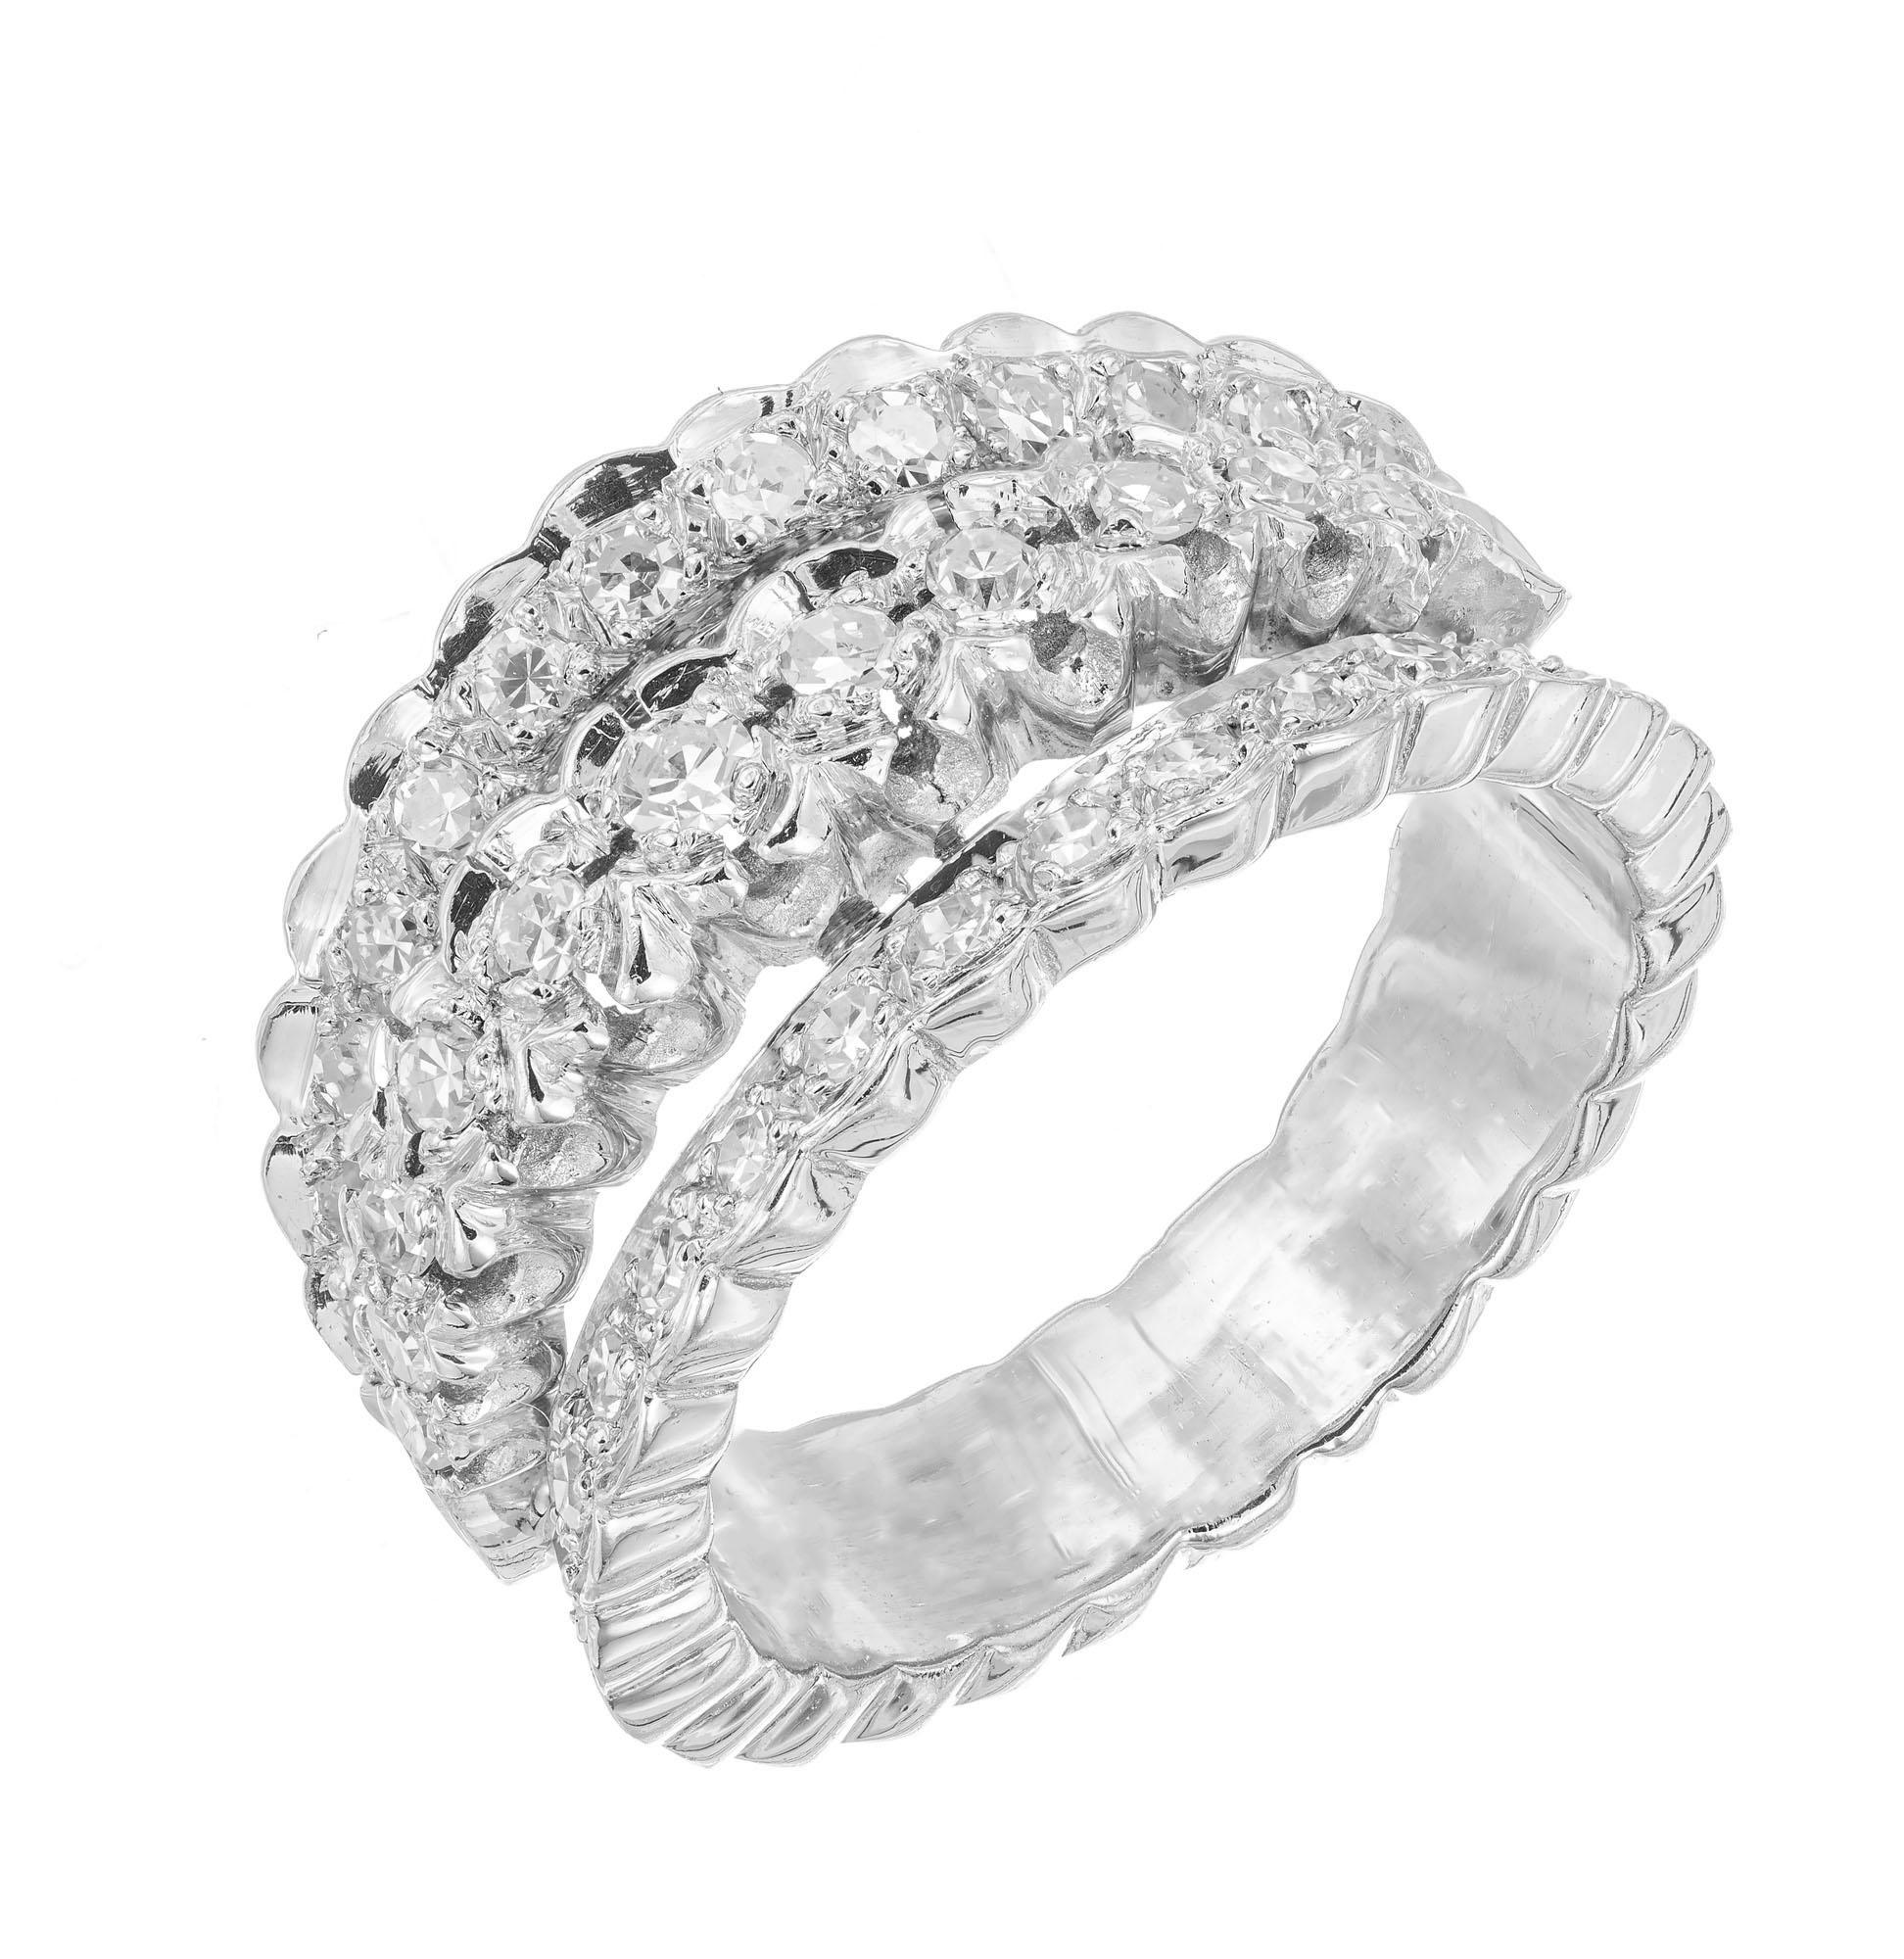 1940's diamond cocktail ring. 37 single cut diamonds in tapered 14k white gold setting. Scalloped open work top with 3 rows of single cut diamonds.

37 single cut diamonds, approx. total weight .80cts, G, VS
Size 7.5 and sizable
14k White